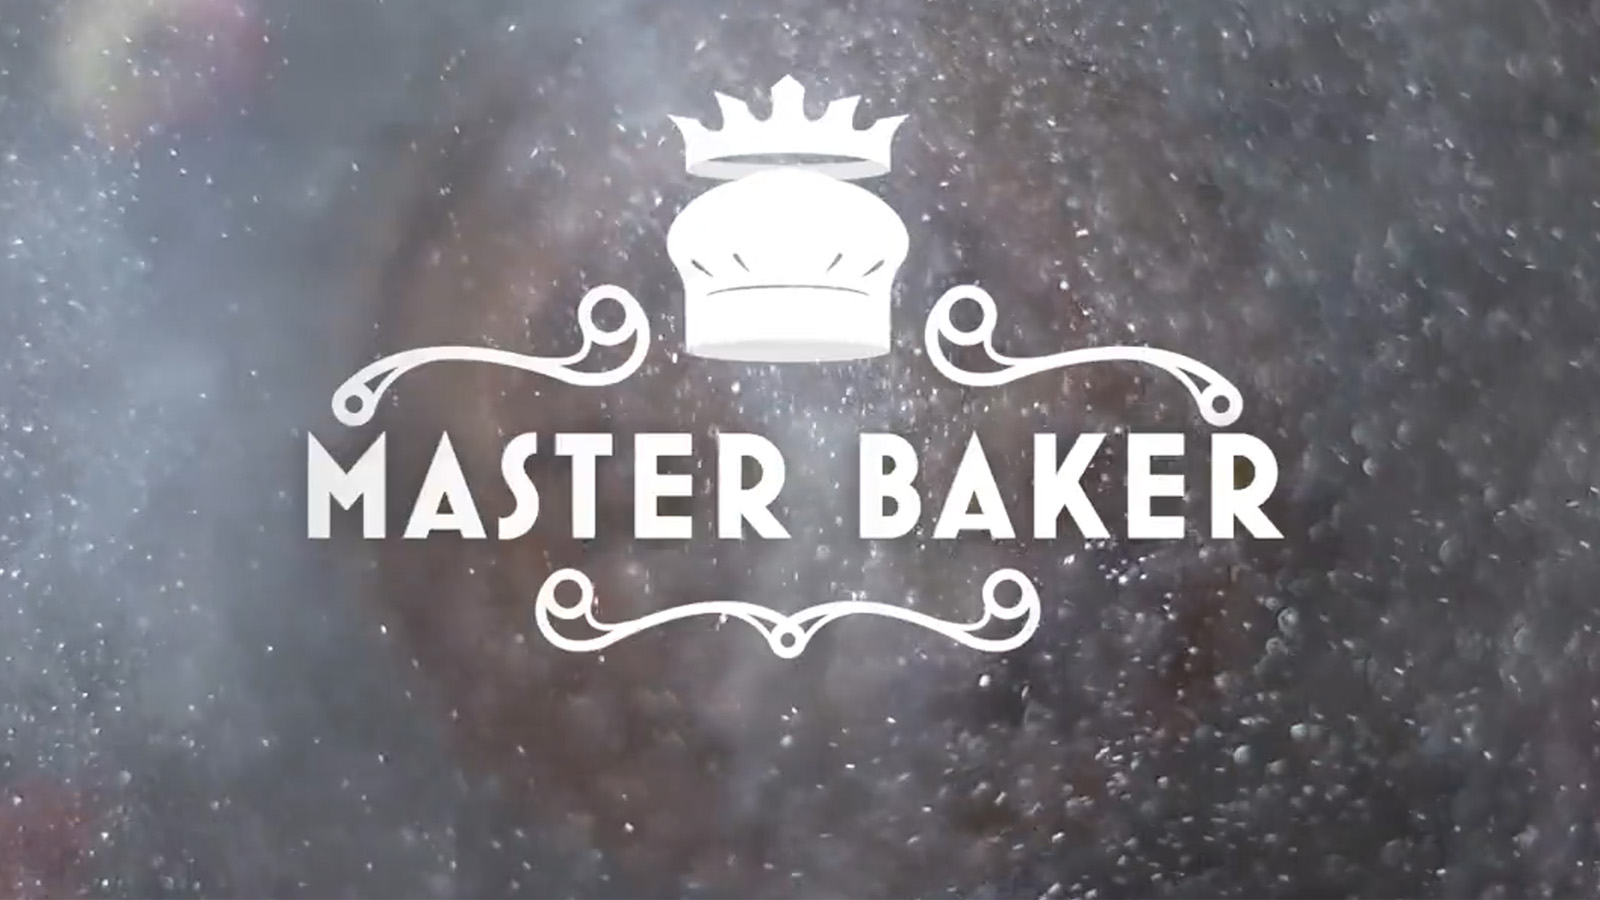 How to Watch QTCinderella’s Master Baker Twitch Show: Dates, Times and Contestants